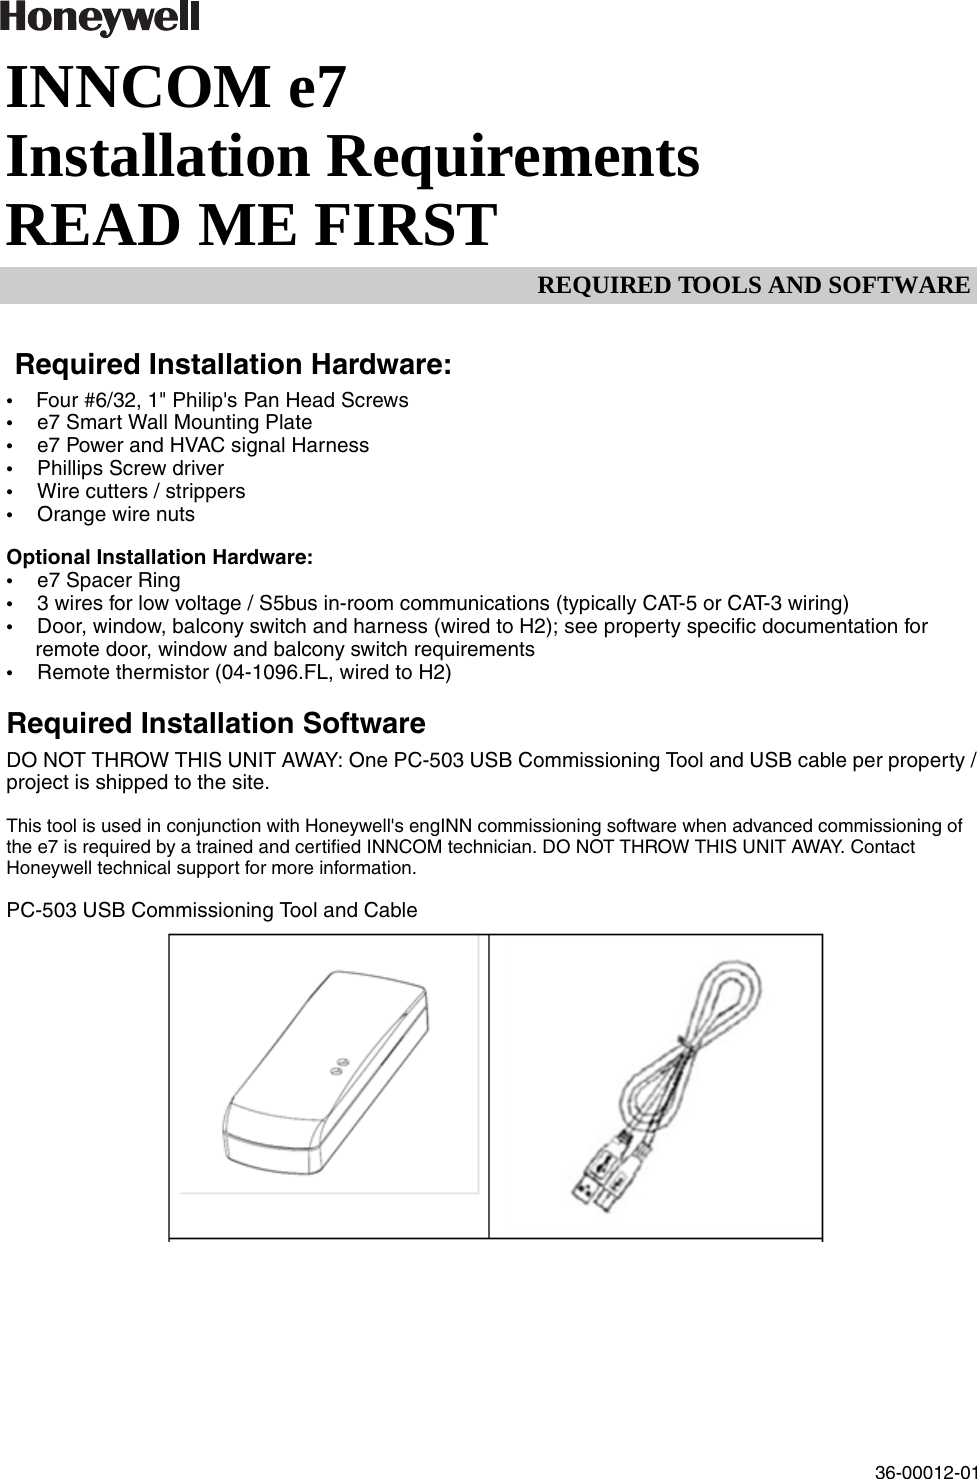 REQUIRED TOOLS AND SOFTWARE36-00012-01INNCOM e7 Installation RequirementsREAD ME FIRST Required Installation Hardware:• Four #6/32, 1&quot; Philip&apos;s Pan Head Screws• e7 Smart Wall Mounting Plate• e7 Power and HVAC signal Harness• Phillips Screw driver• Wire cutters / strippers• Orange wire nuts Optional Installation Hardware:• e7 Spacer Ring• 3 wires for low voltage / S5bus in-room communications (typically CAT-5 or CAT-3 wiring)• Door, window, balcony switch and harness (wired to H2); see property specific documentation for remote door, window and balcony switch requirements• Remote thermistor (04-1096.FL, wired to H2)Required Installation SoftwareDO NOT THROW THIS UNIT AWAY: One PC-503 USB Commissioning Tool and USB cable per property / project is shipped to the site.This tool is used in conjunction with Honeywell&apos;s engINN commissioning software when advanced commissioning of the e7 is required by a trained and certified INNCOM technician. DO NOT THROW THIS UNIT AWAY. Contact Honeywell technical support for more information. PC-503 USB Commissioning Tool and Cable 